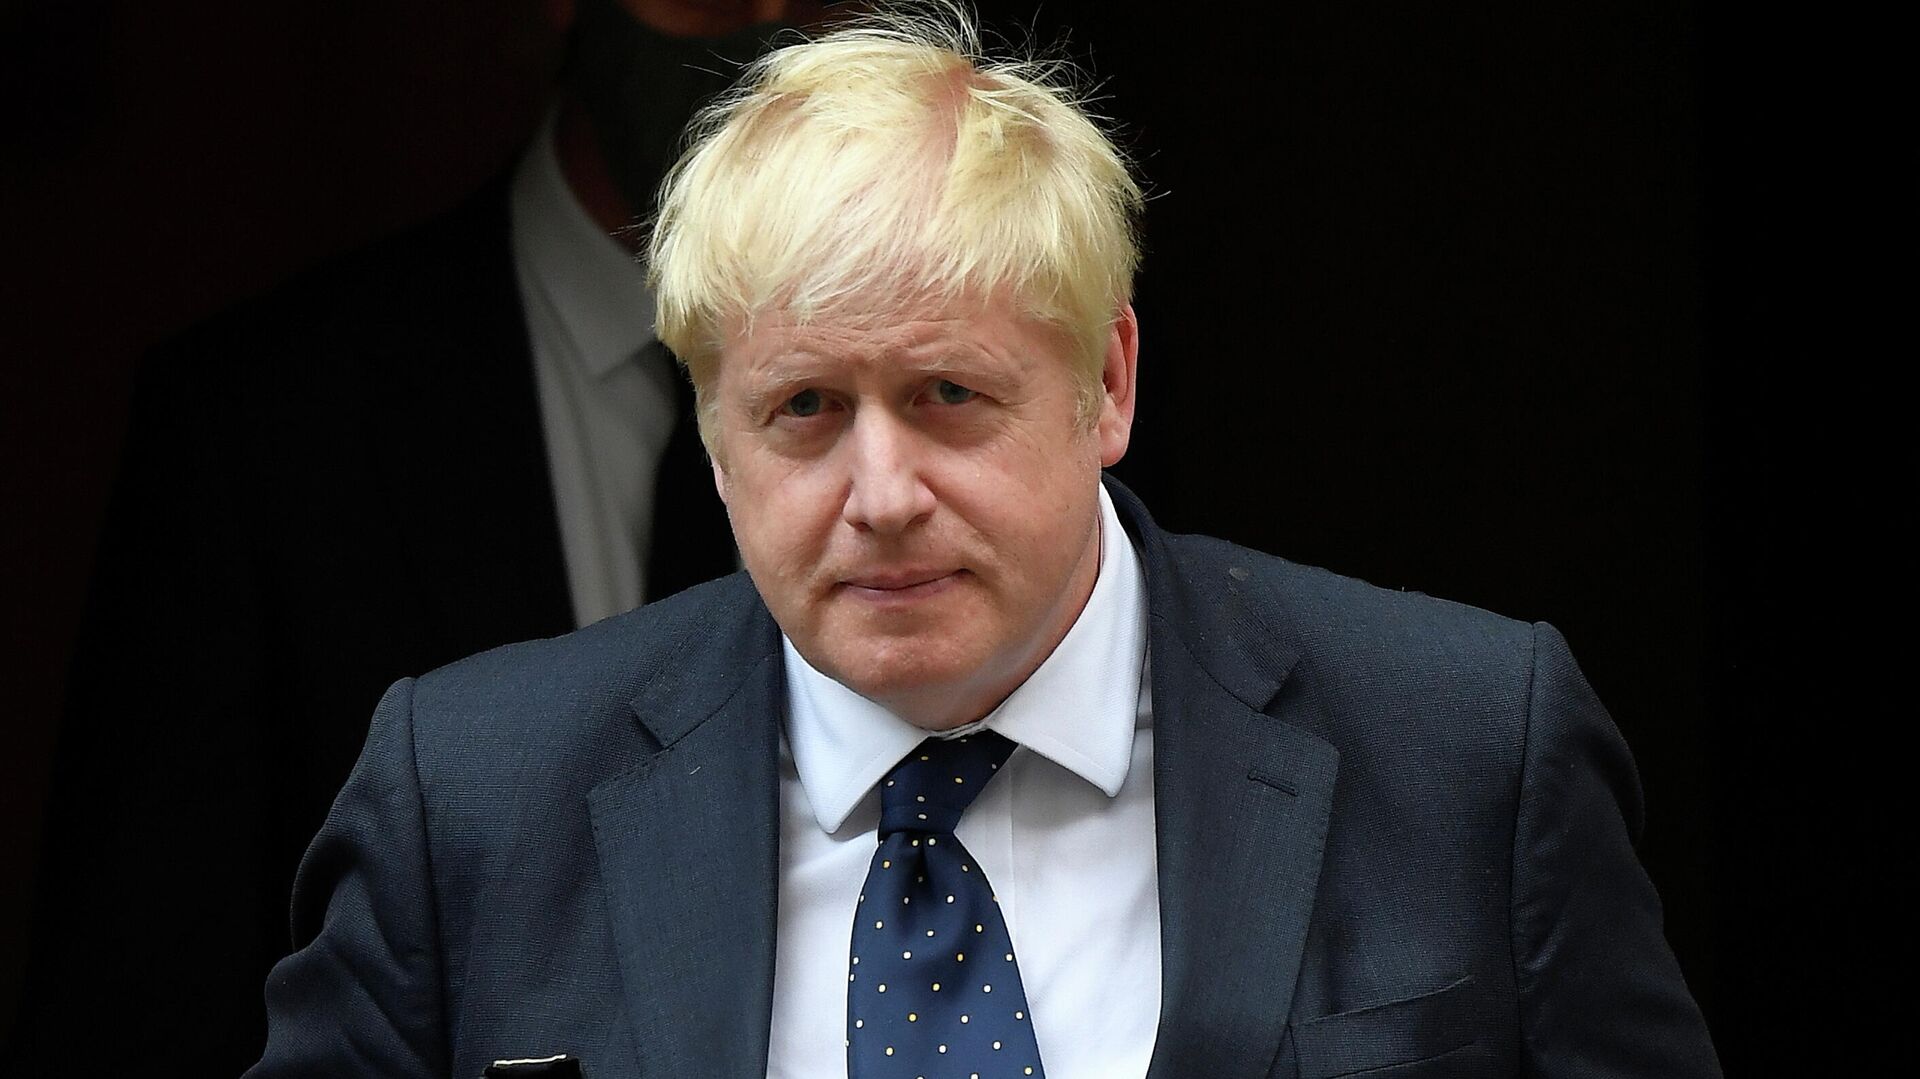 Britain's Prime Minister Boris Johnson leaves Downing Street, ahead of addressing lawmakers about Britain's withdrawal from Afghanistan, in London, Britain, September 6, 2021 - Sputnik International, 1920, 11.09.2021